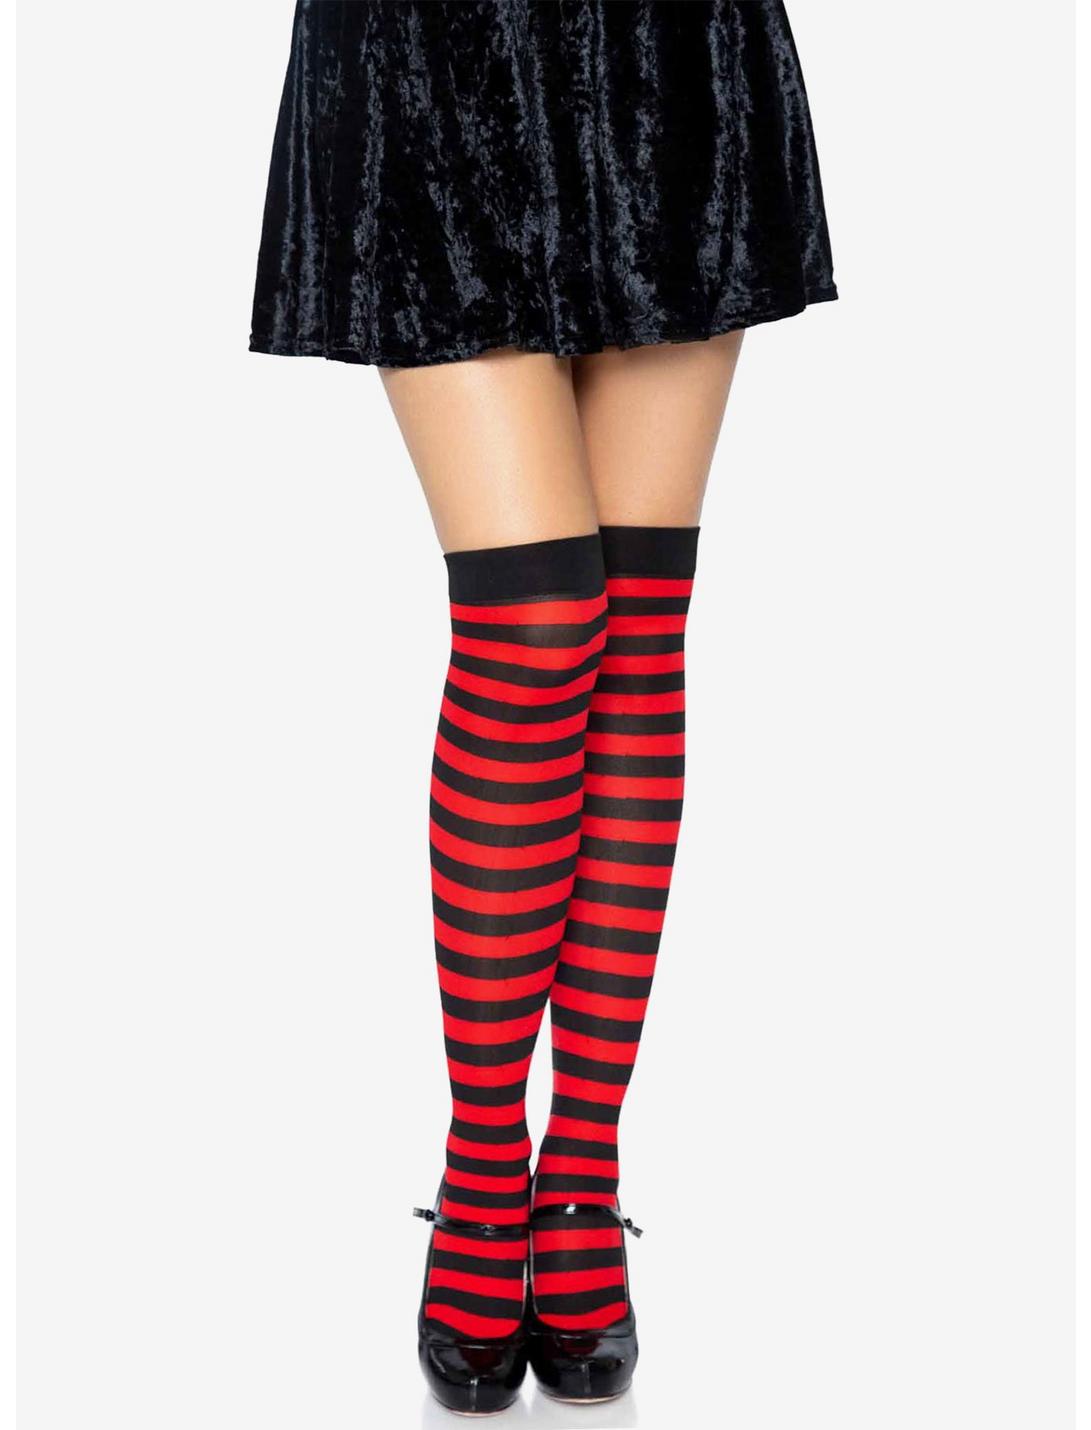 Black And Red Nylon Over-The-Knee Stocking With Stripes, , hi-res